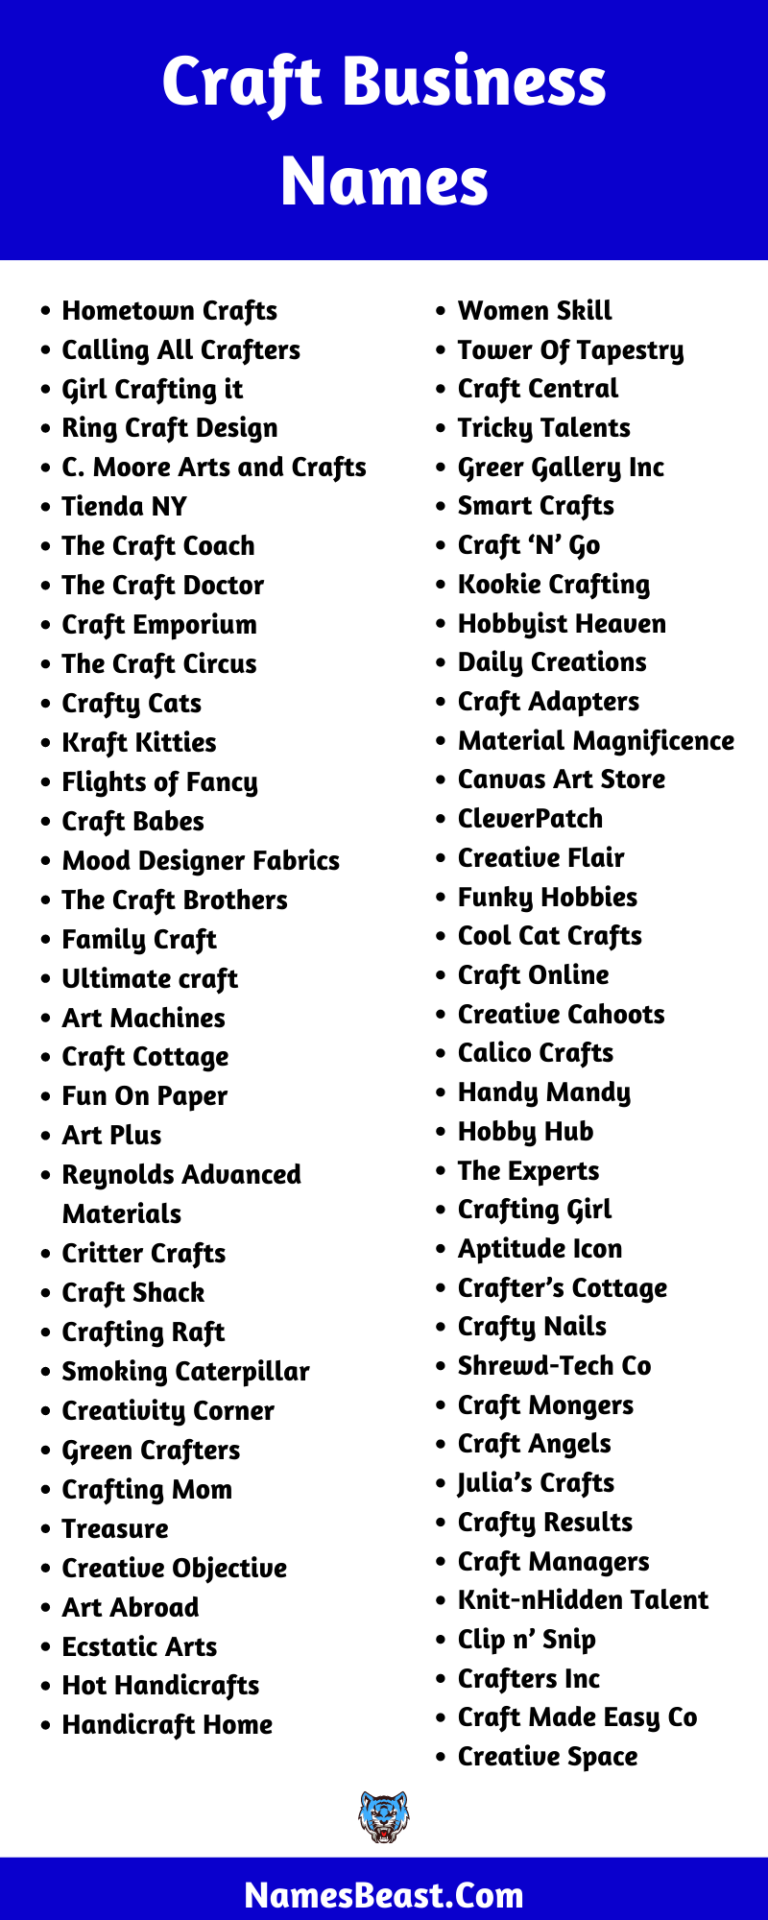 750+ Craft Business Names and Store Names